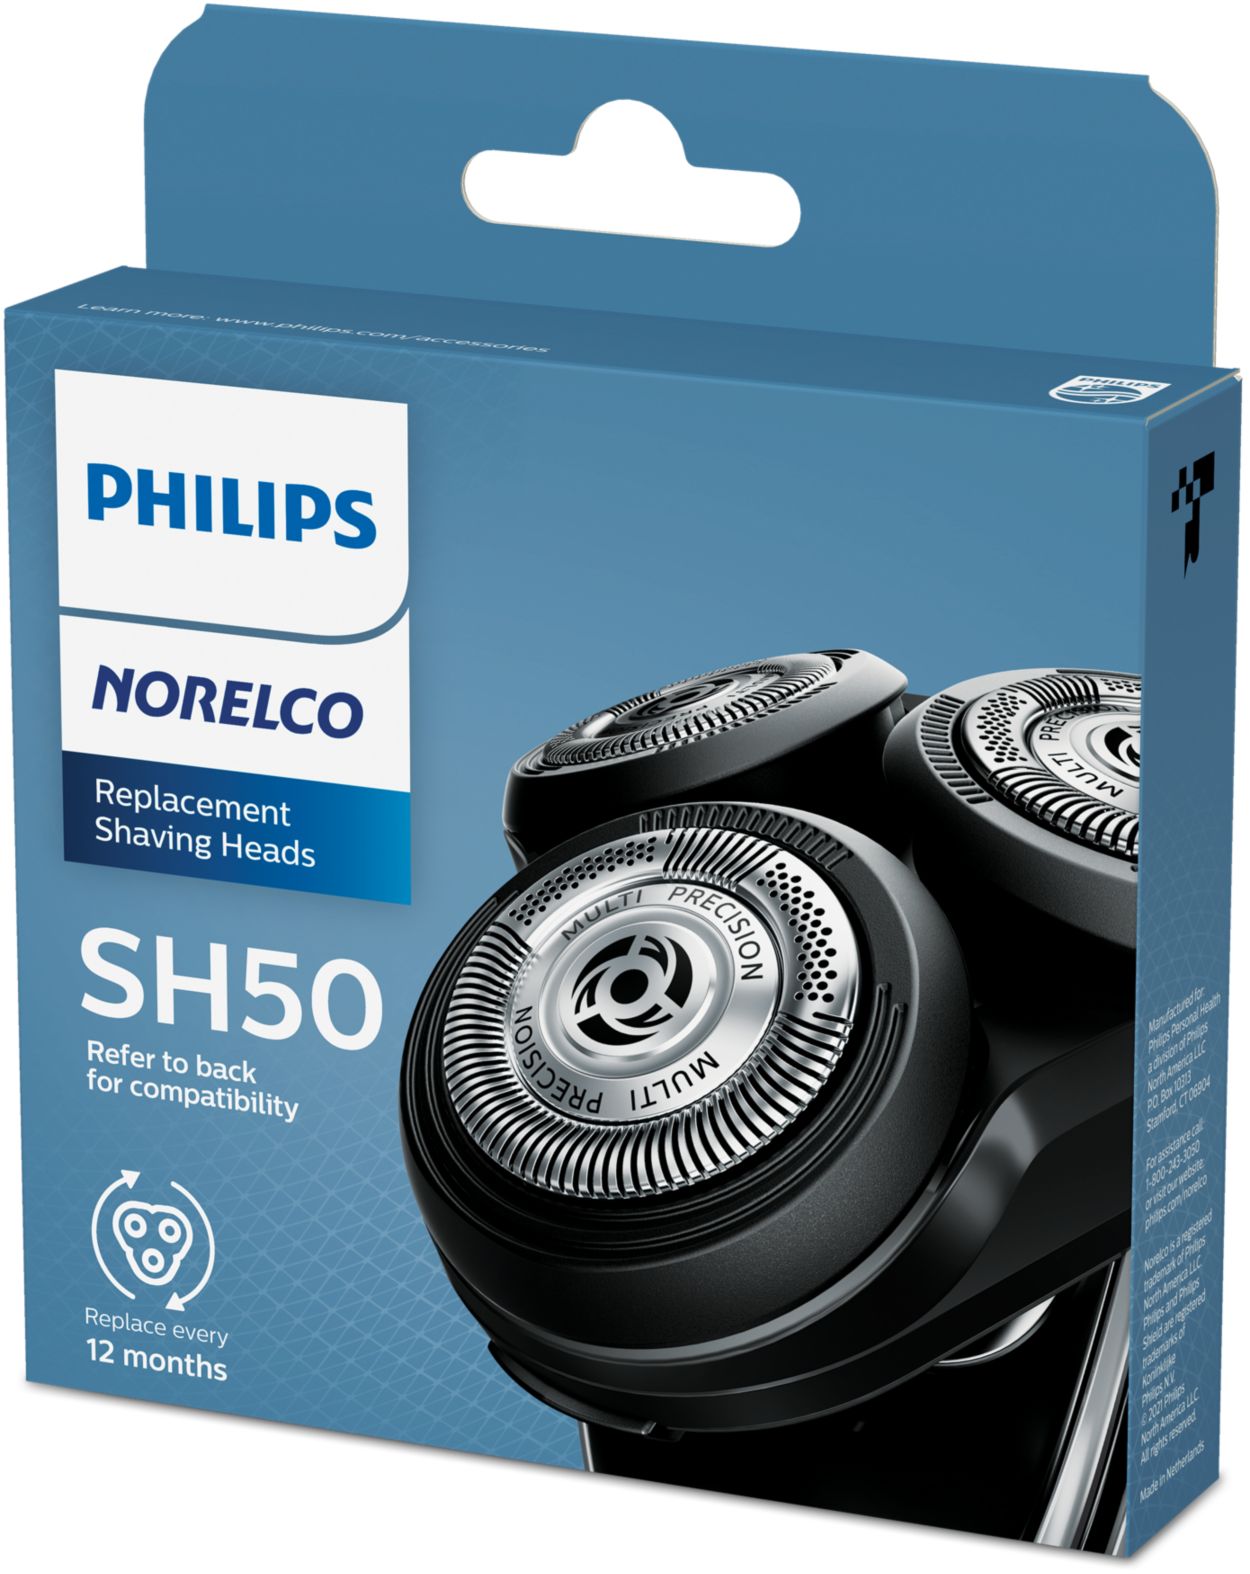 Replacement SH50 Series 5000 Norelco Shaving Heads Philips